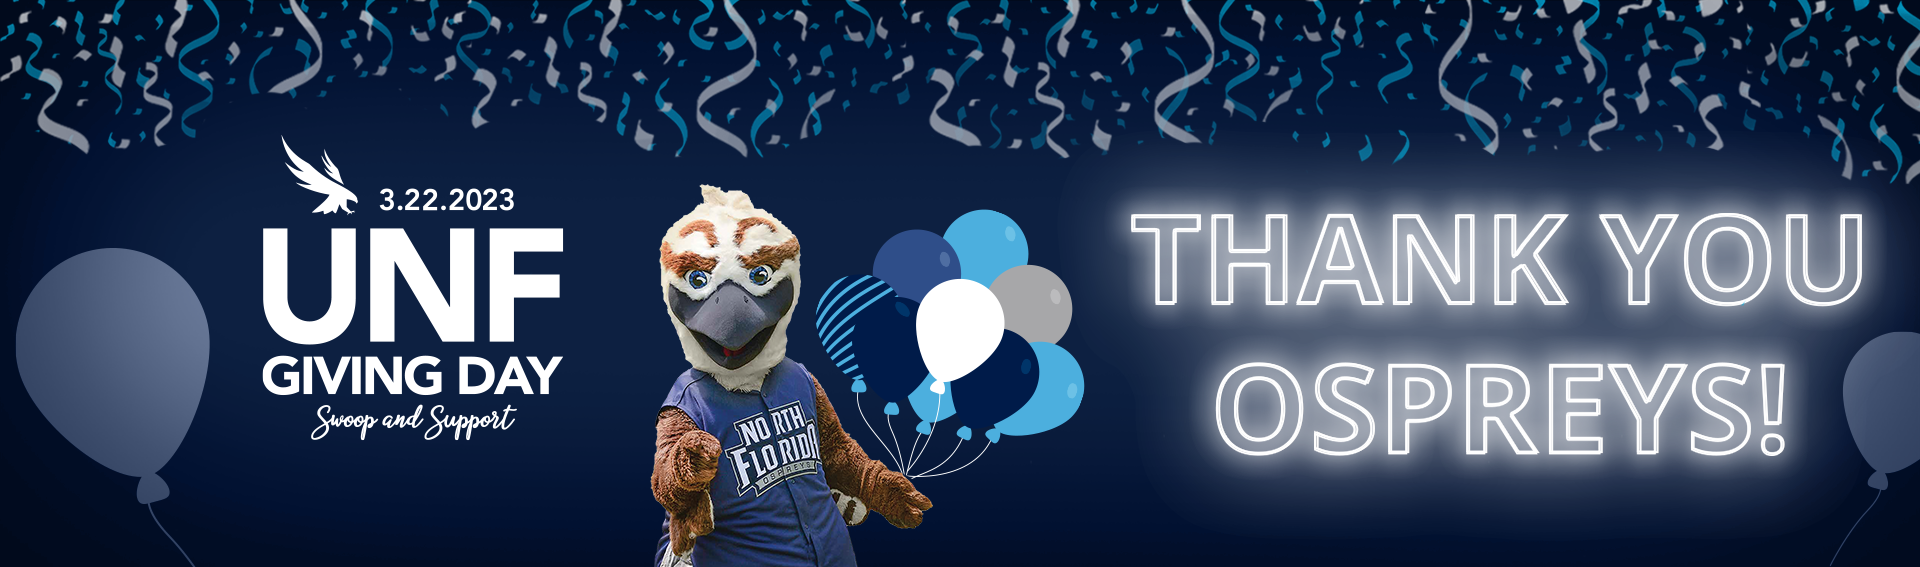 Osprey mascot holding balloons 3.22.2023 unf giving day swoop and support thank you ospreys